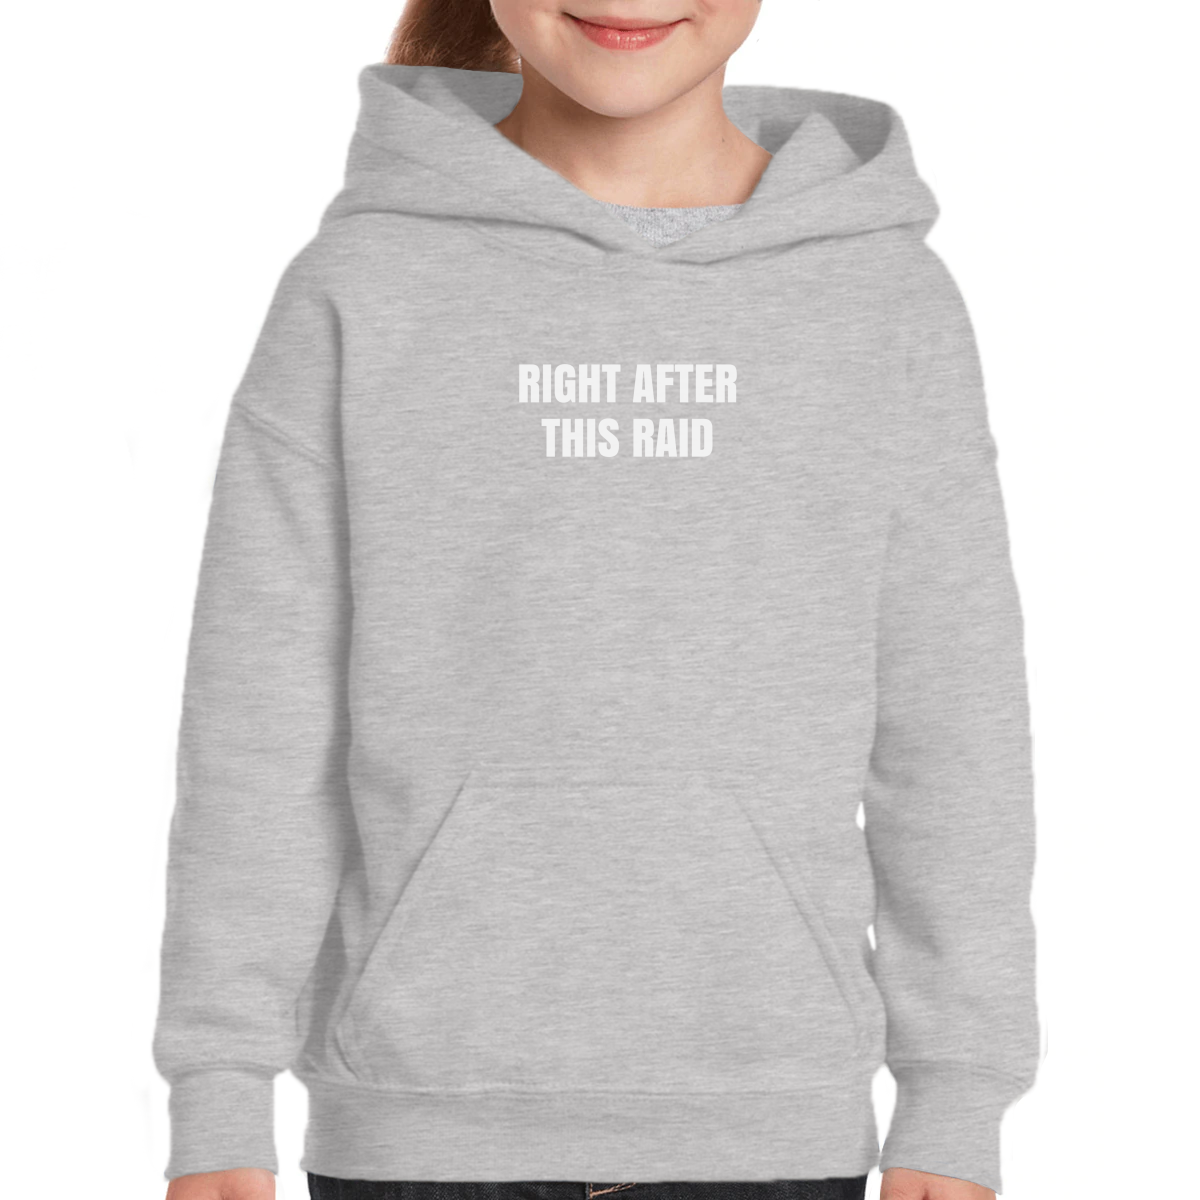 Right After This Raid Kids Hoodie | Gray